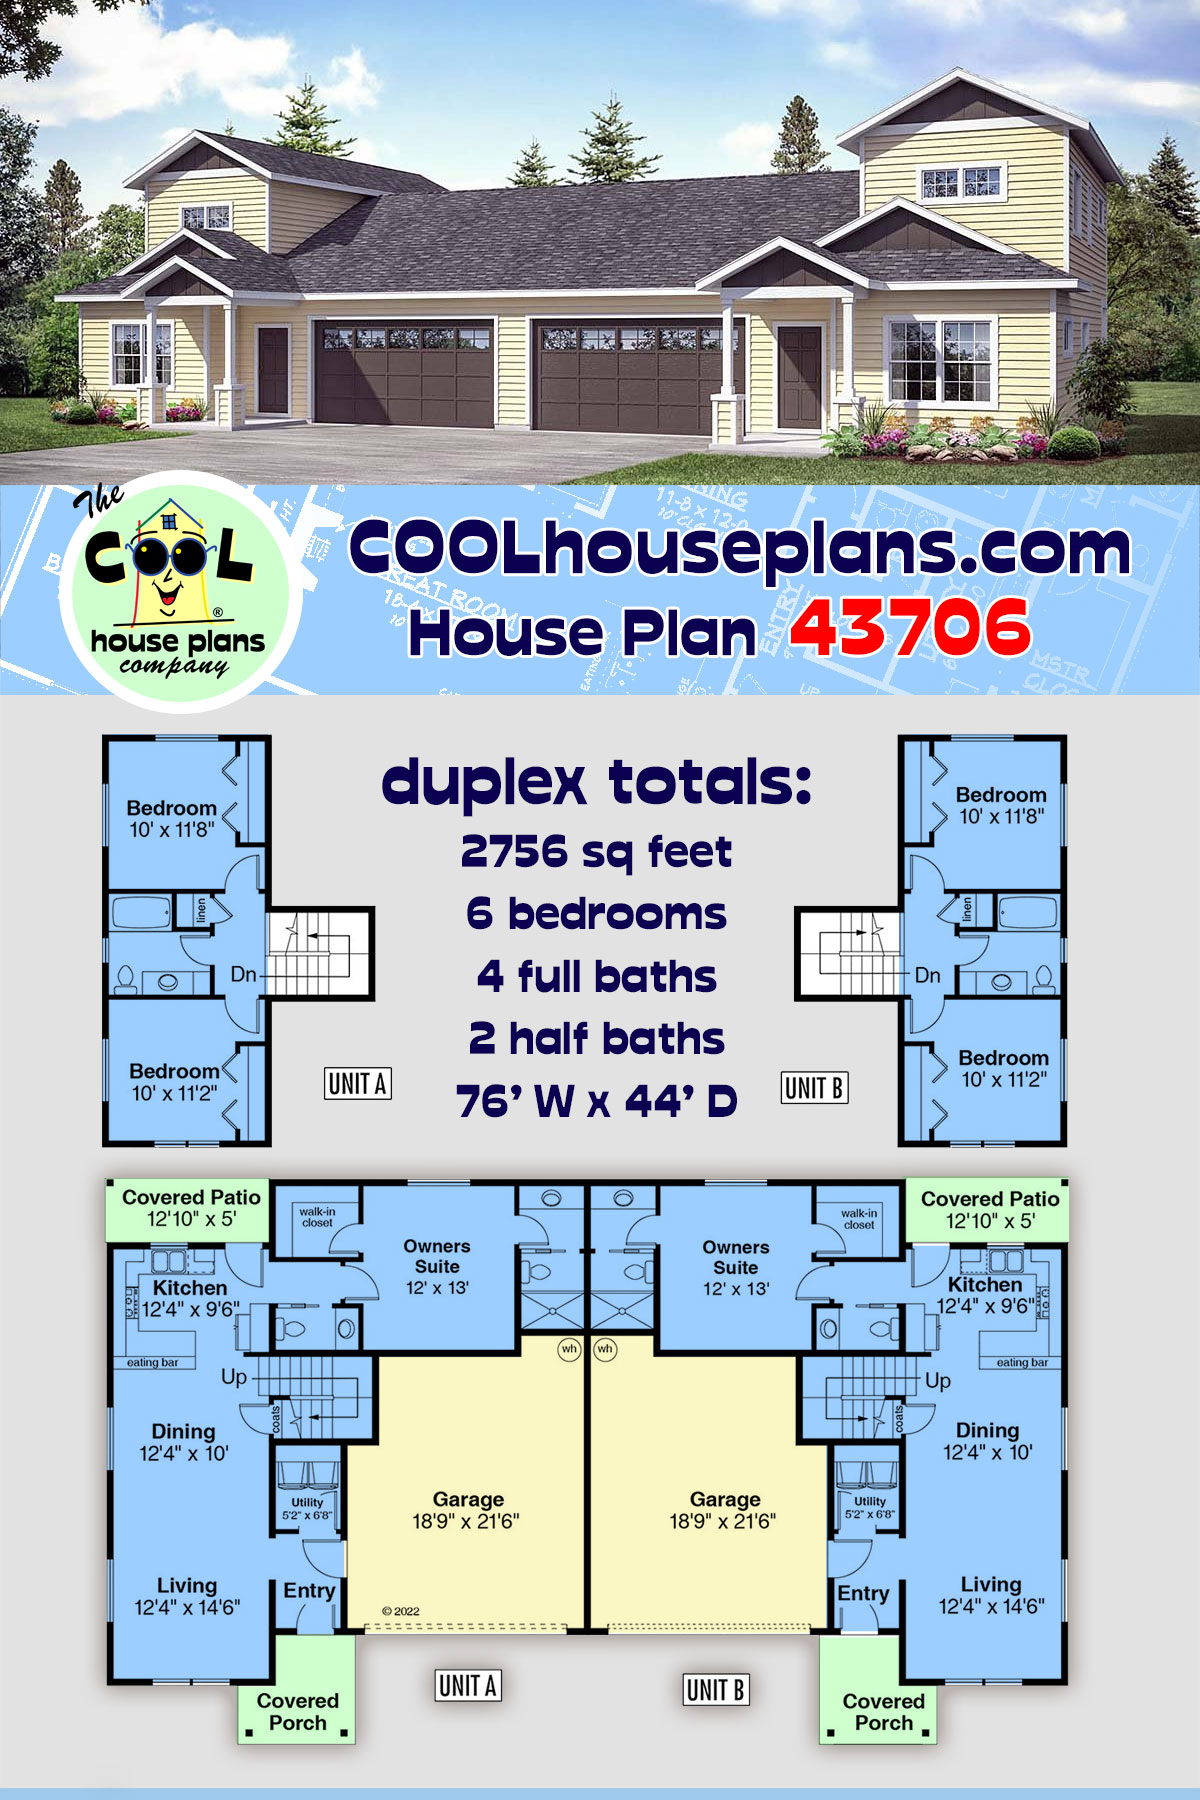 Cottage, Country, Traditional Multi-Family Plan 43706 with 6 Beds, 6 Baths, 4 Car Garage